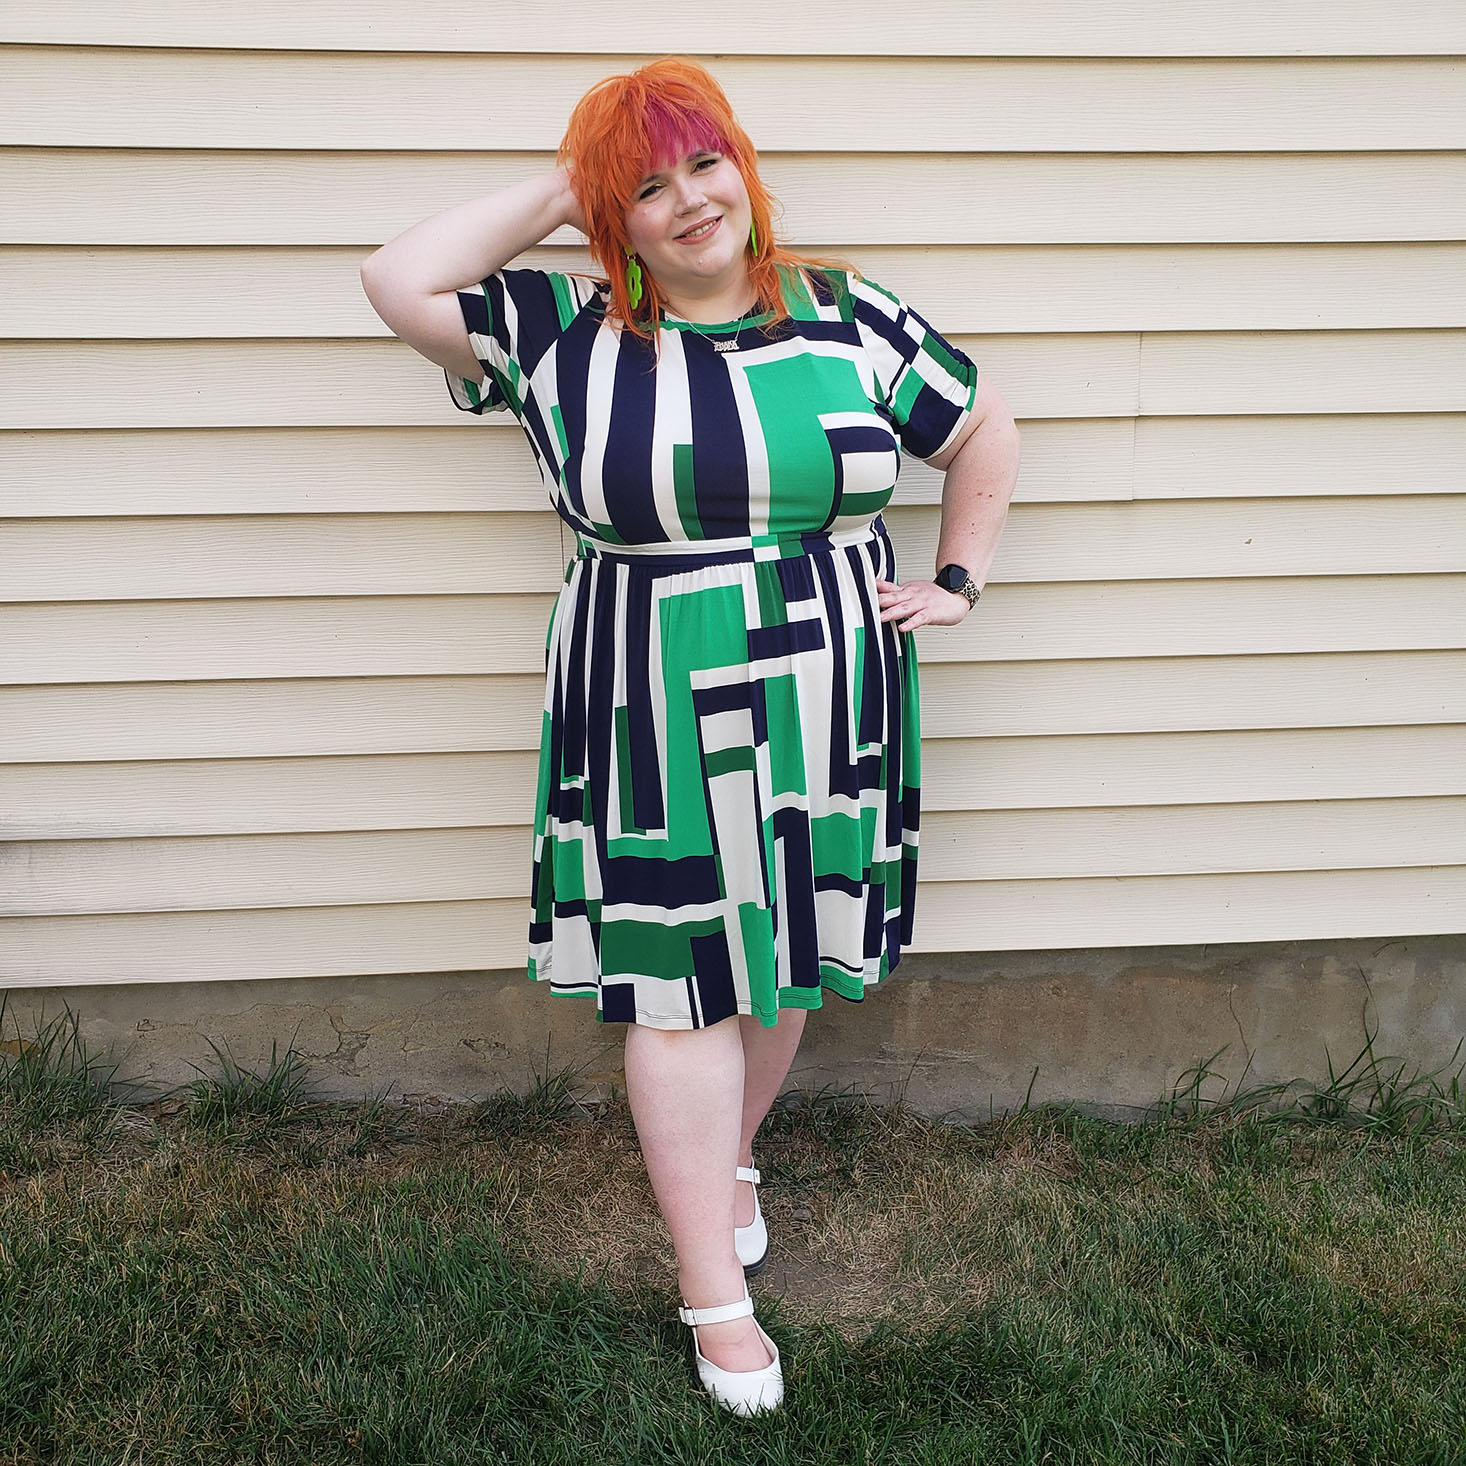 Style in the Mail: A Look at Gwynnie Bee